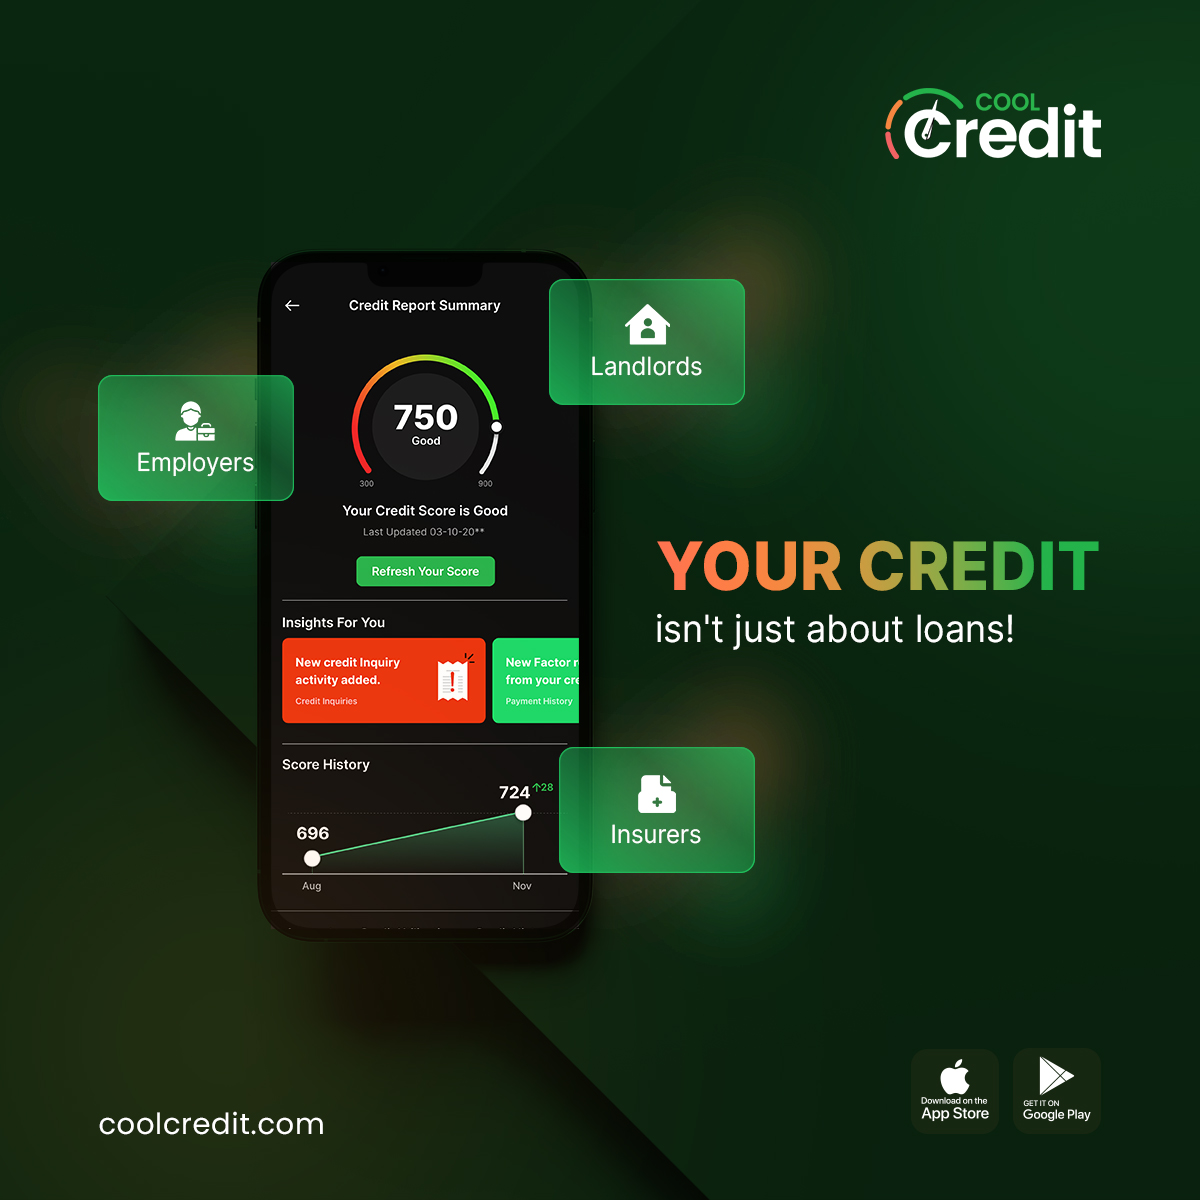 Credit reports and scores matter beyond #loans. Landlords, employers, and #insurers may check them for rentals, hiring, and setting premiums respectively. So, ready to take your credit seriously? Start by Downloading the #CoolCreditApp!